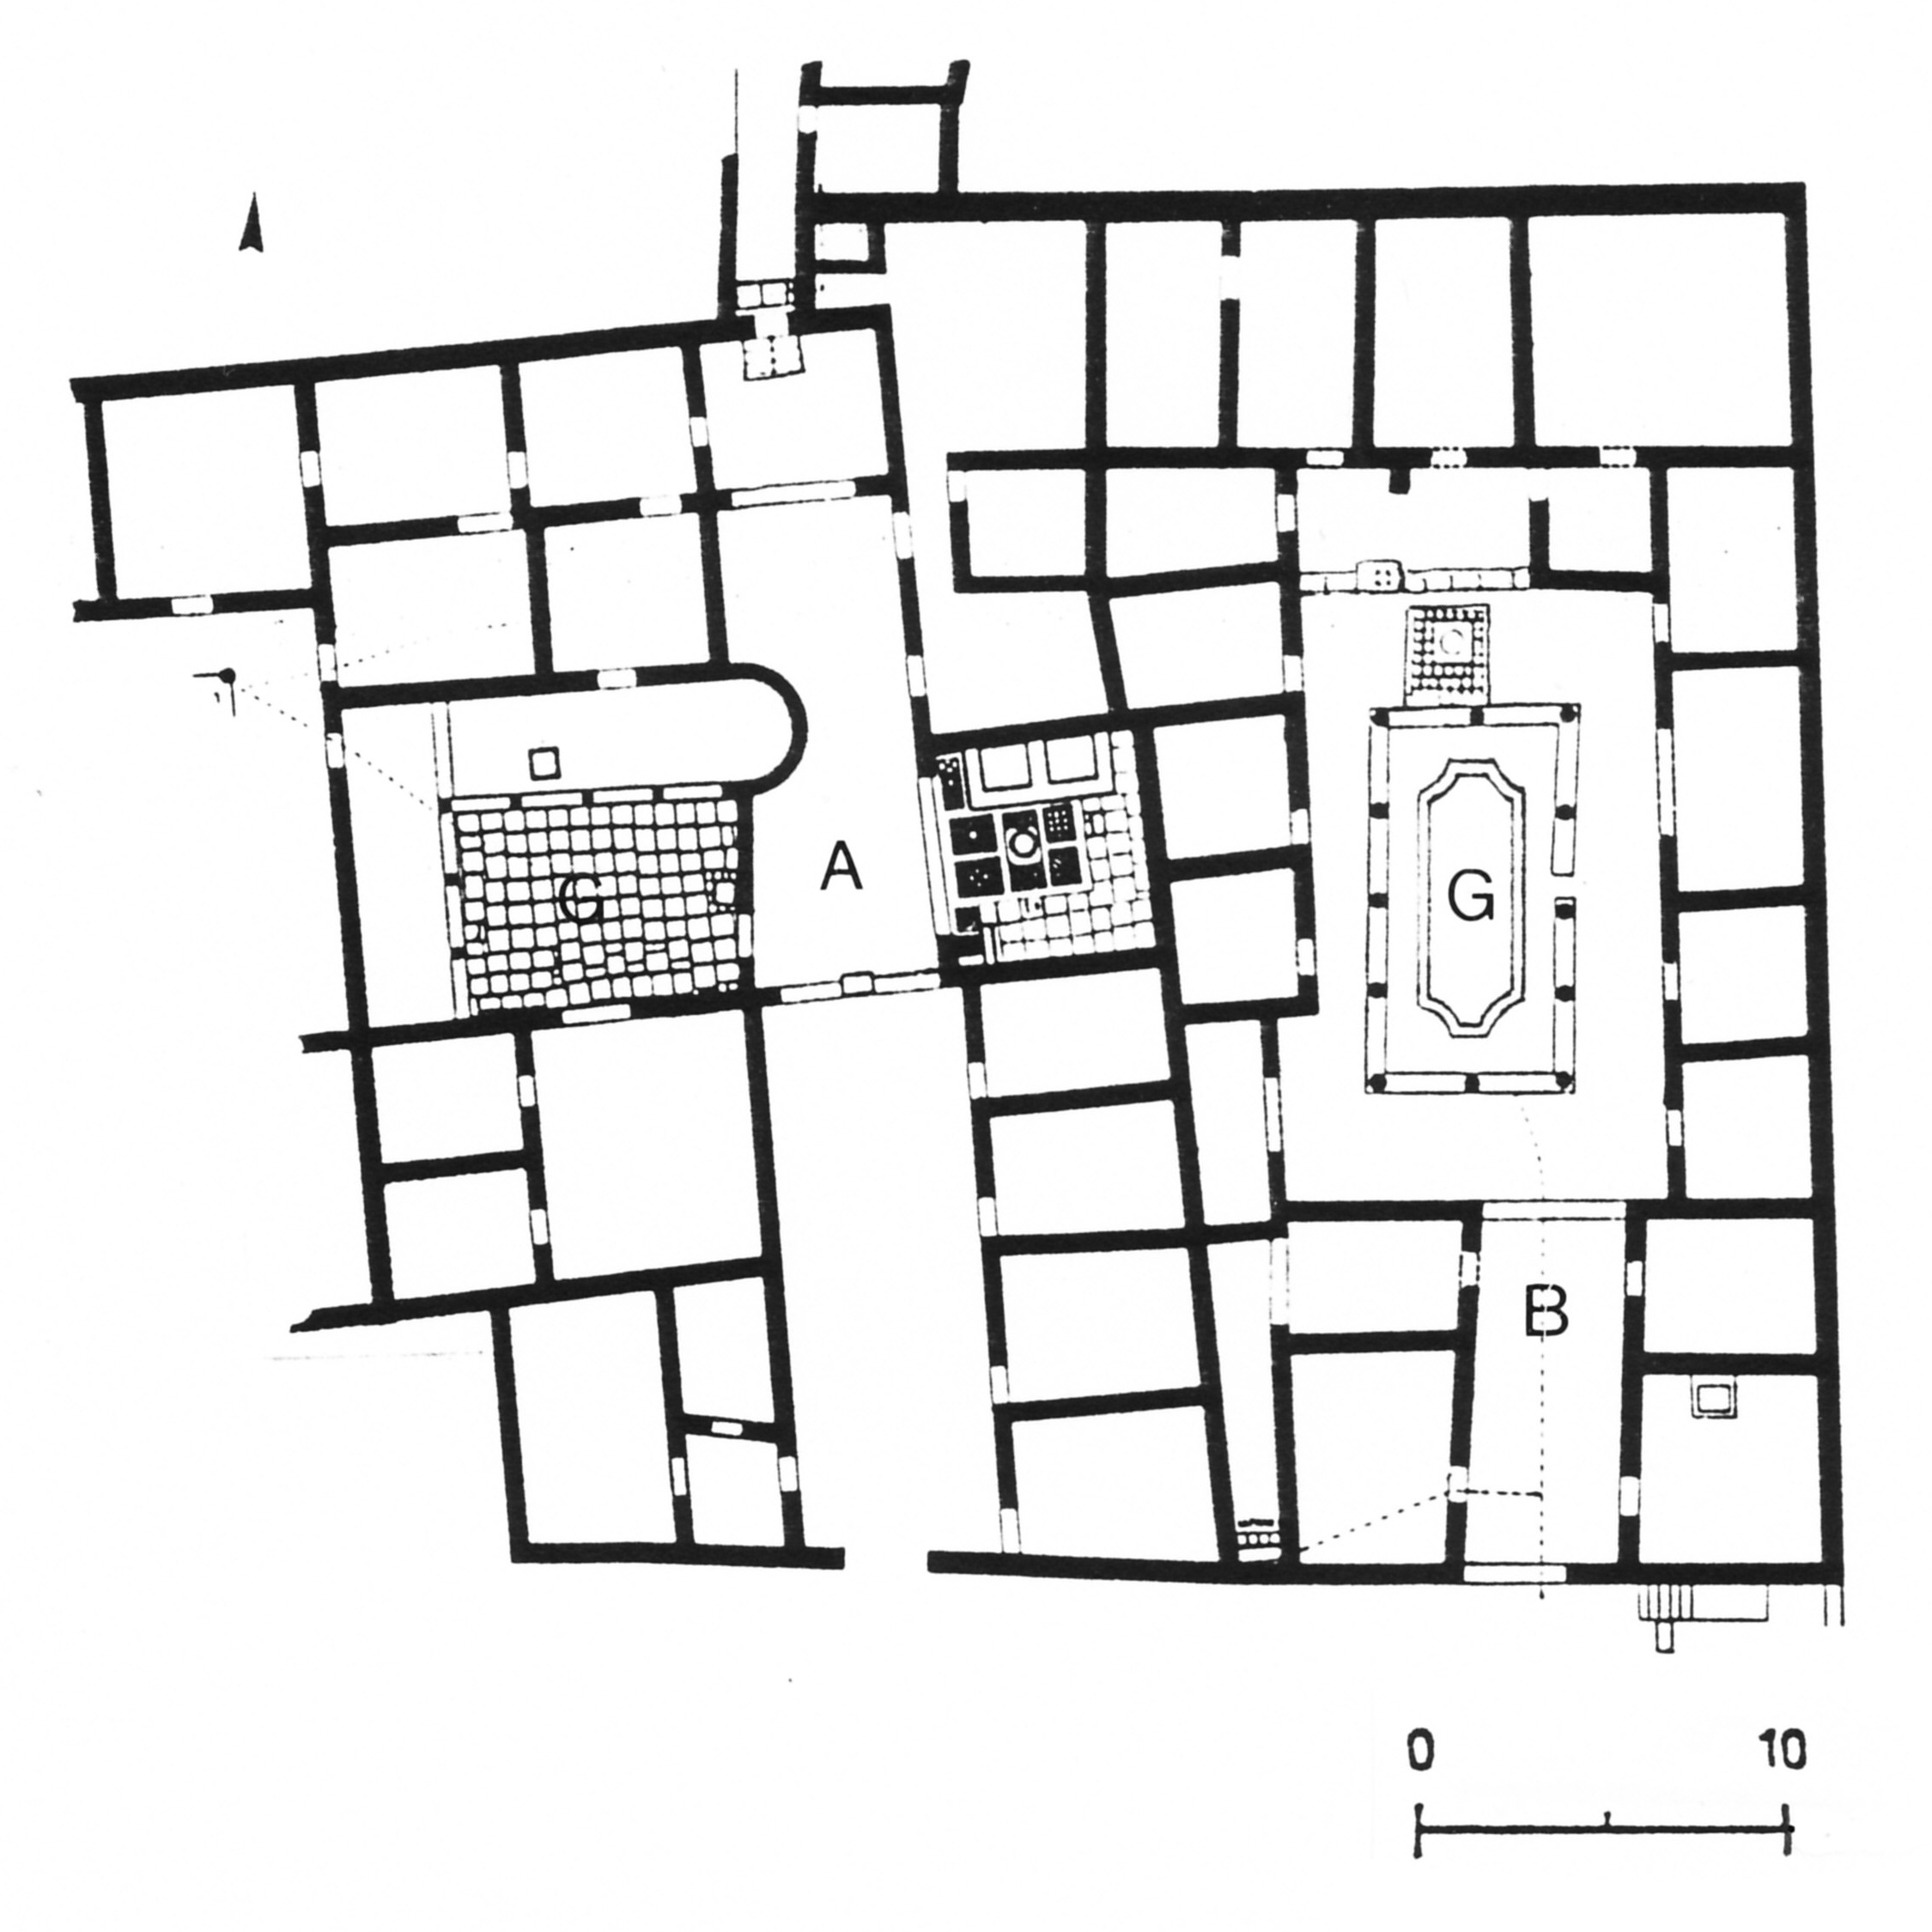 Plan of Guest Houses 1 and 2 with their courtyard gardens.